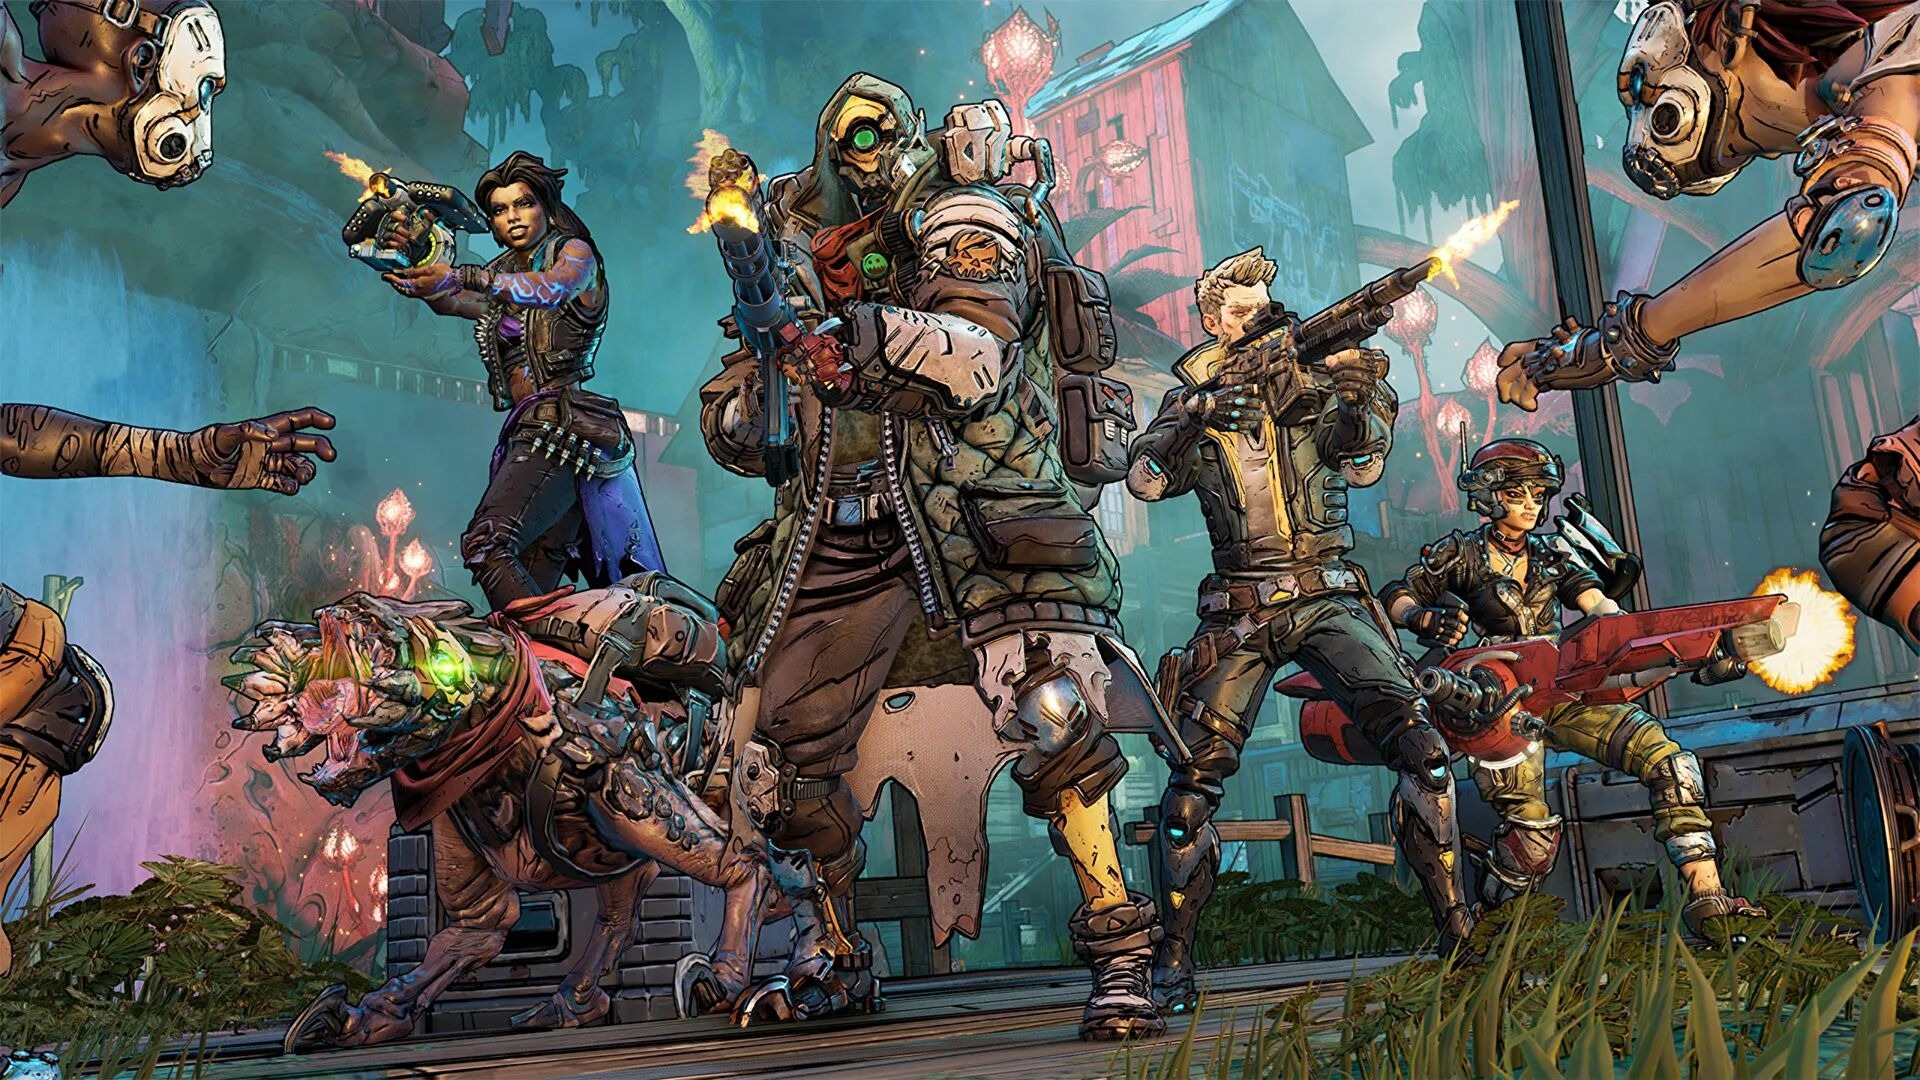 Epic Games Borderlands 3 is now free on the platform. How to claim the game and crossplay between Steam and Epic Games? Let's find out all!